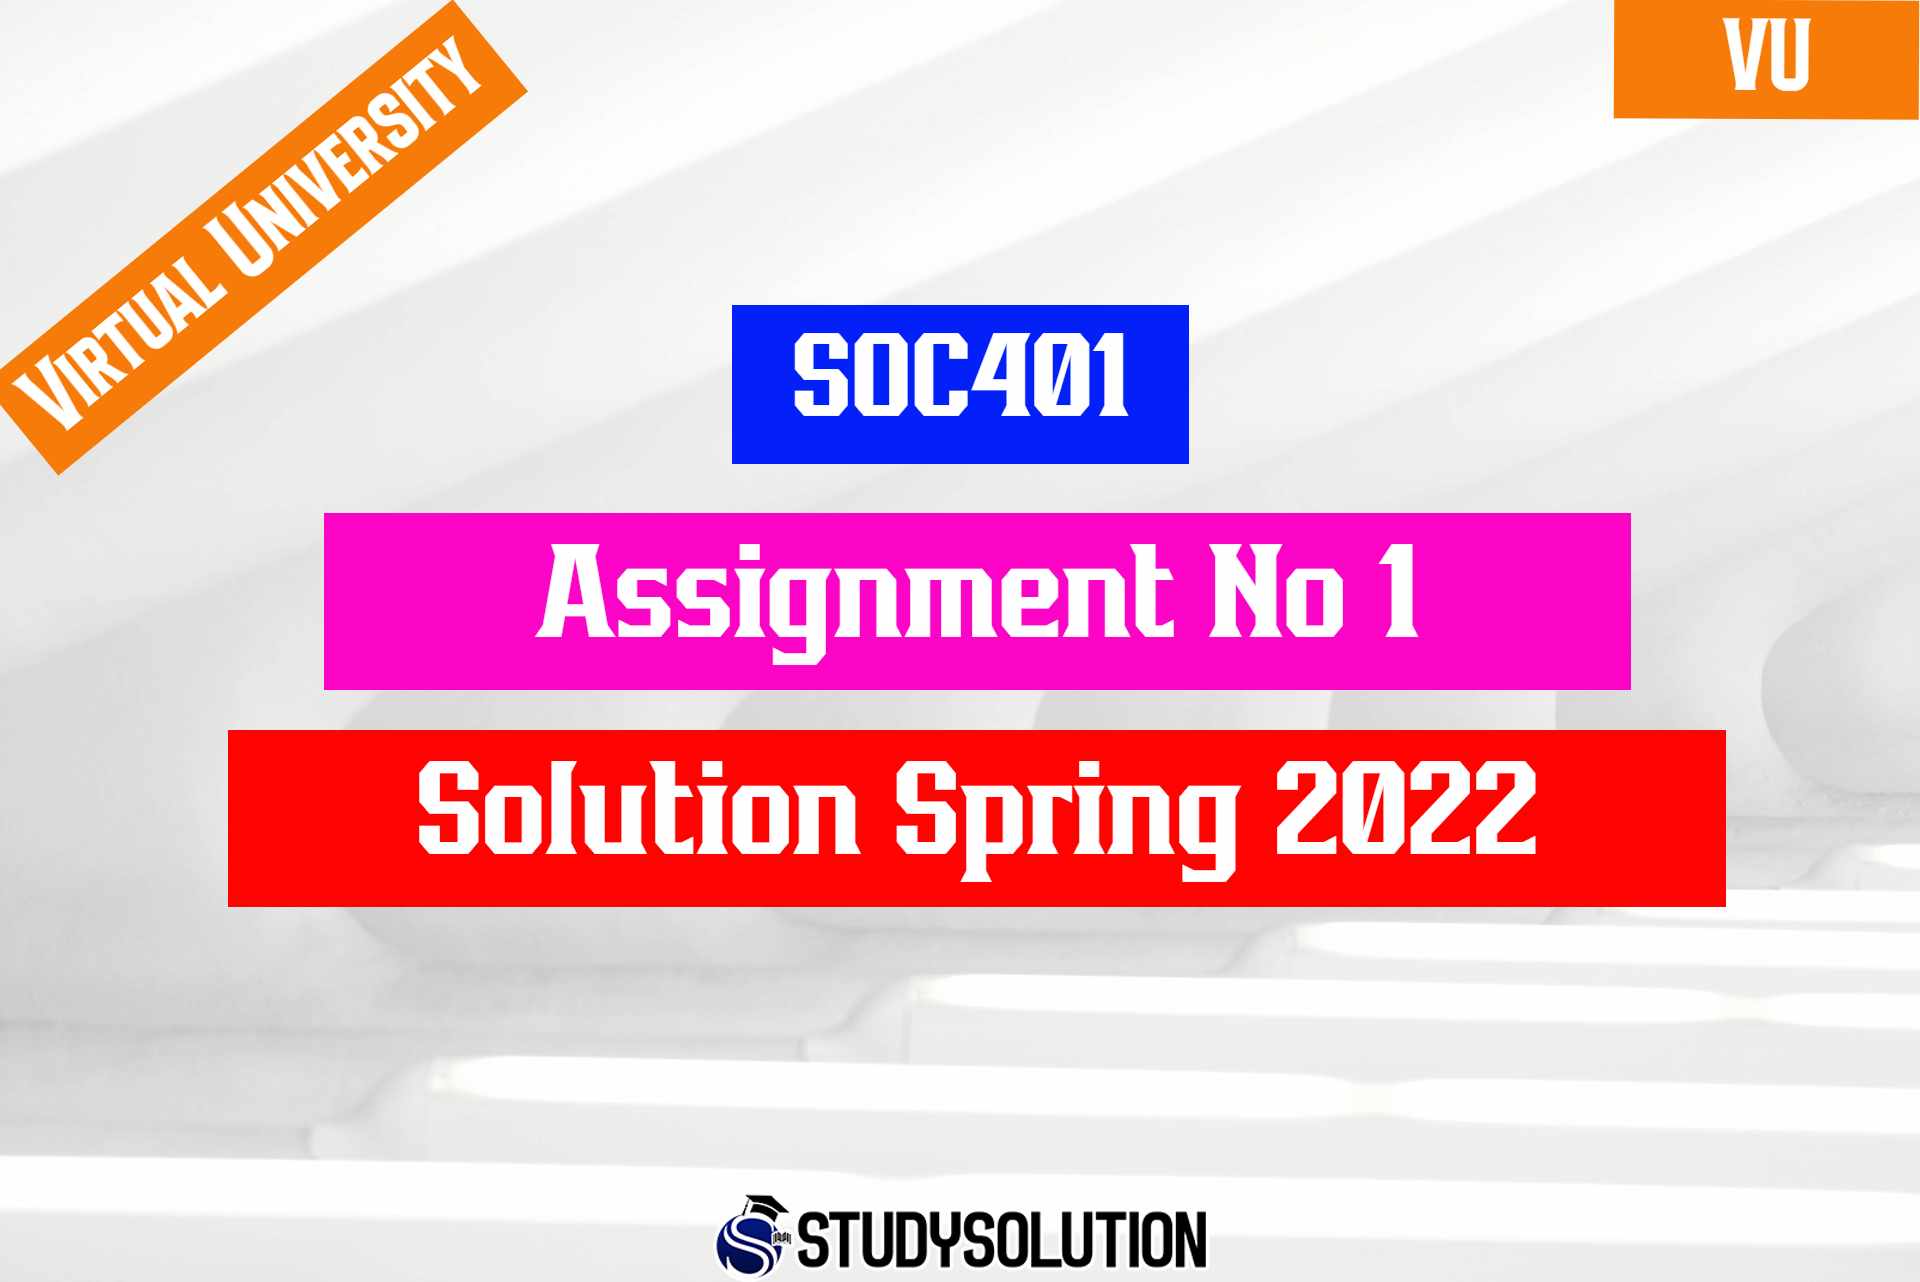 SOC401 Assignment No 1 Solution Spring 2022